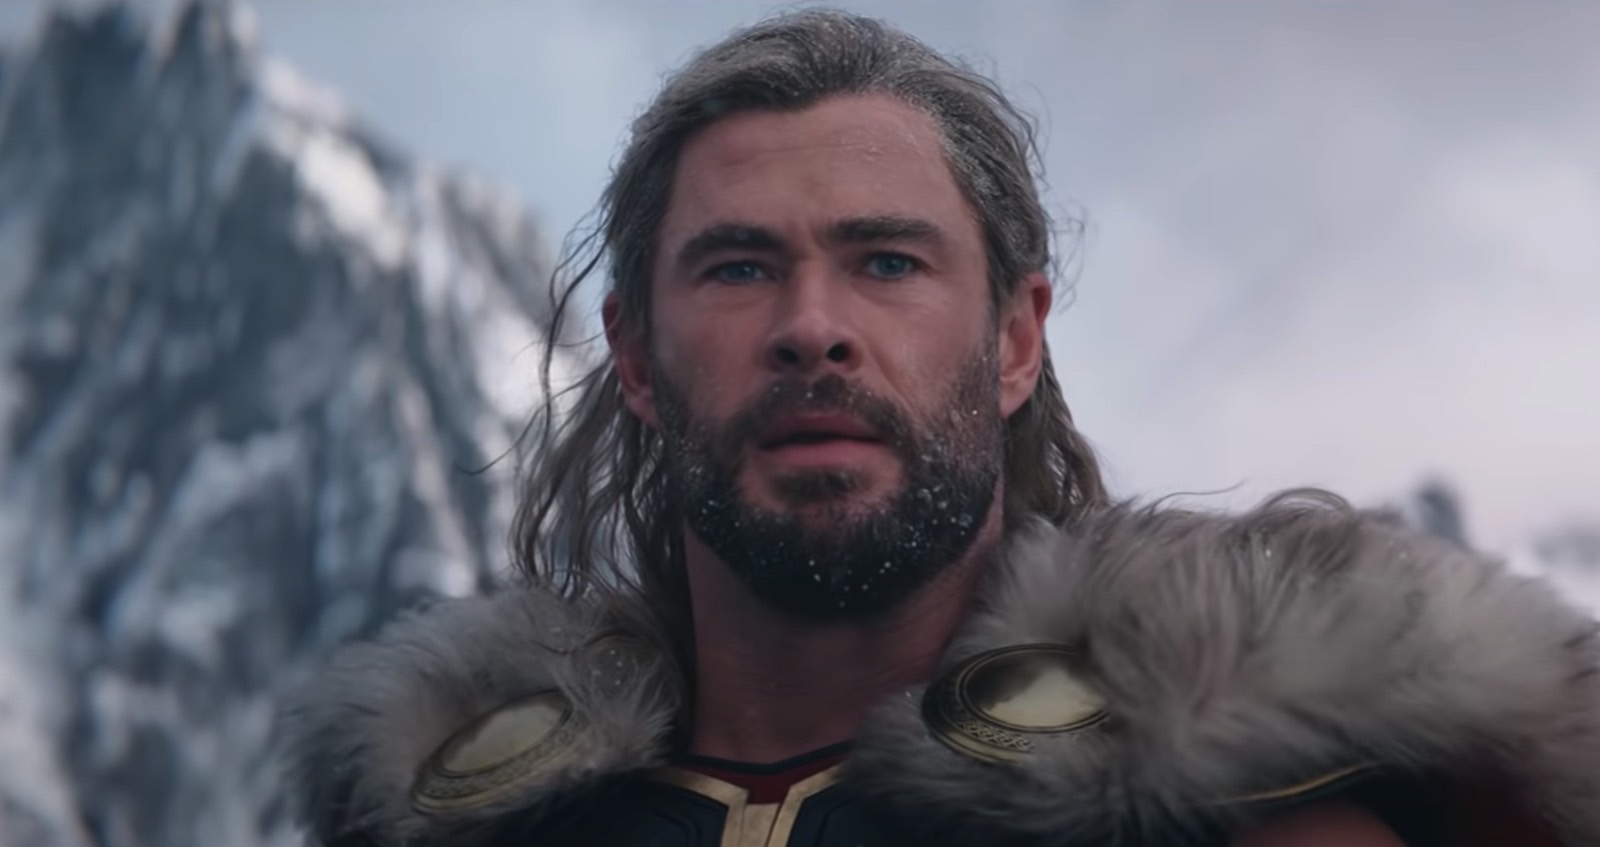 Naked Thor is the most replayed part of Love and Thunder trailer 2